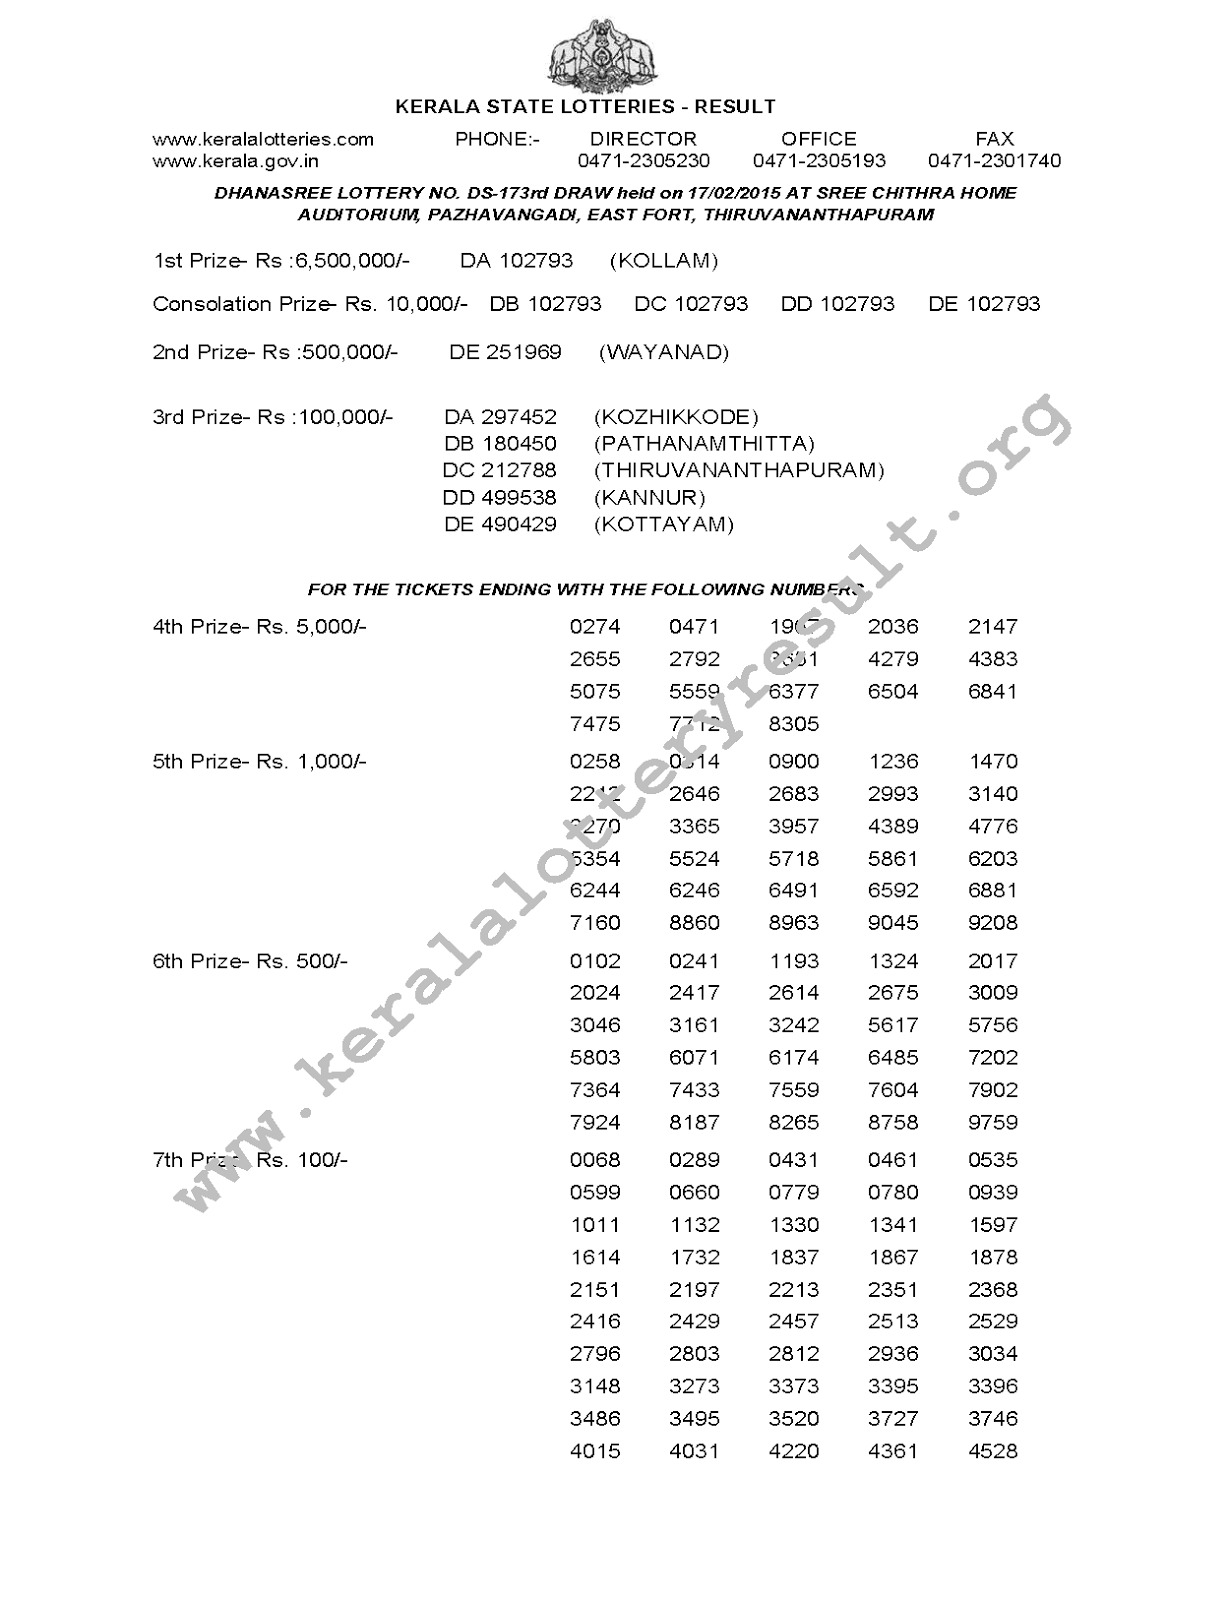 DHANASREE DS 173 Lottery Result 17-02-2015